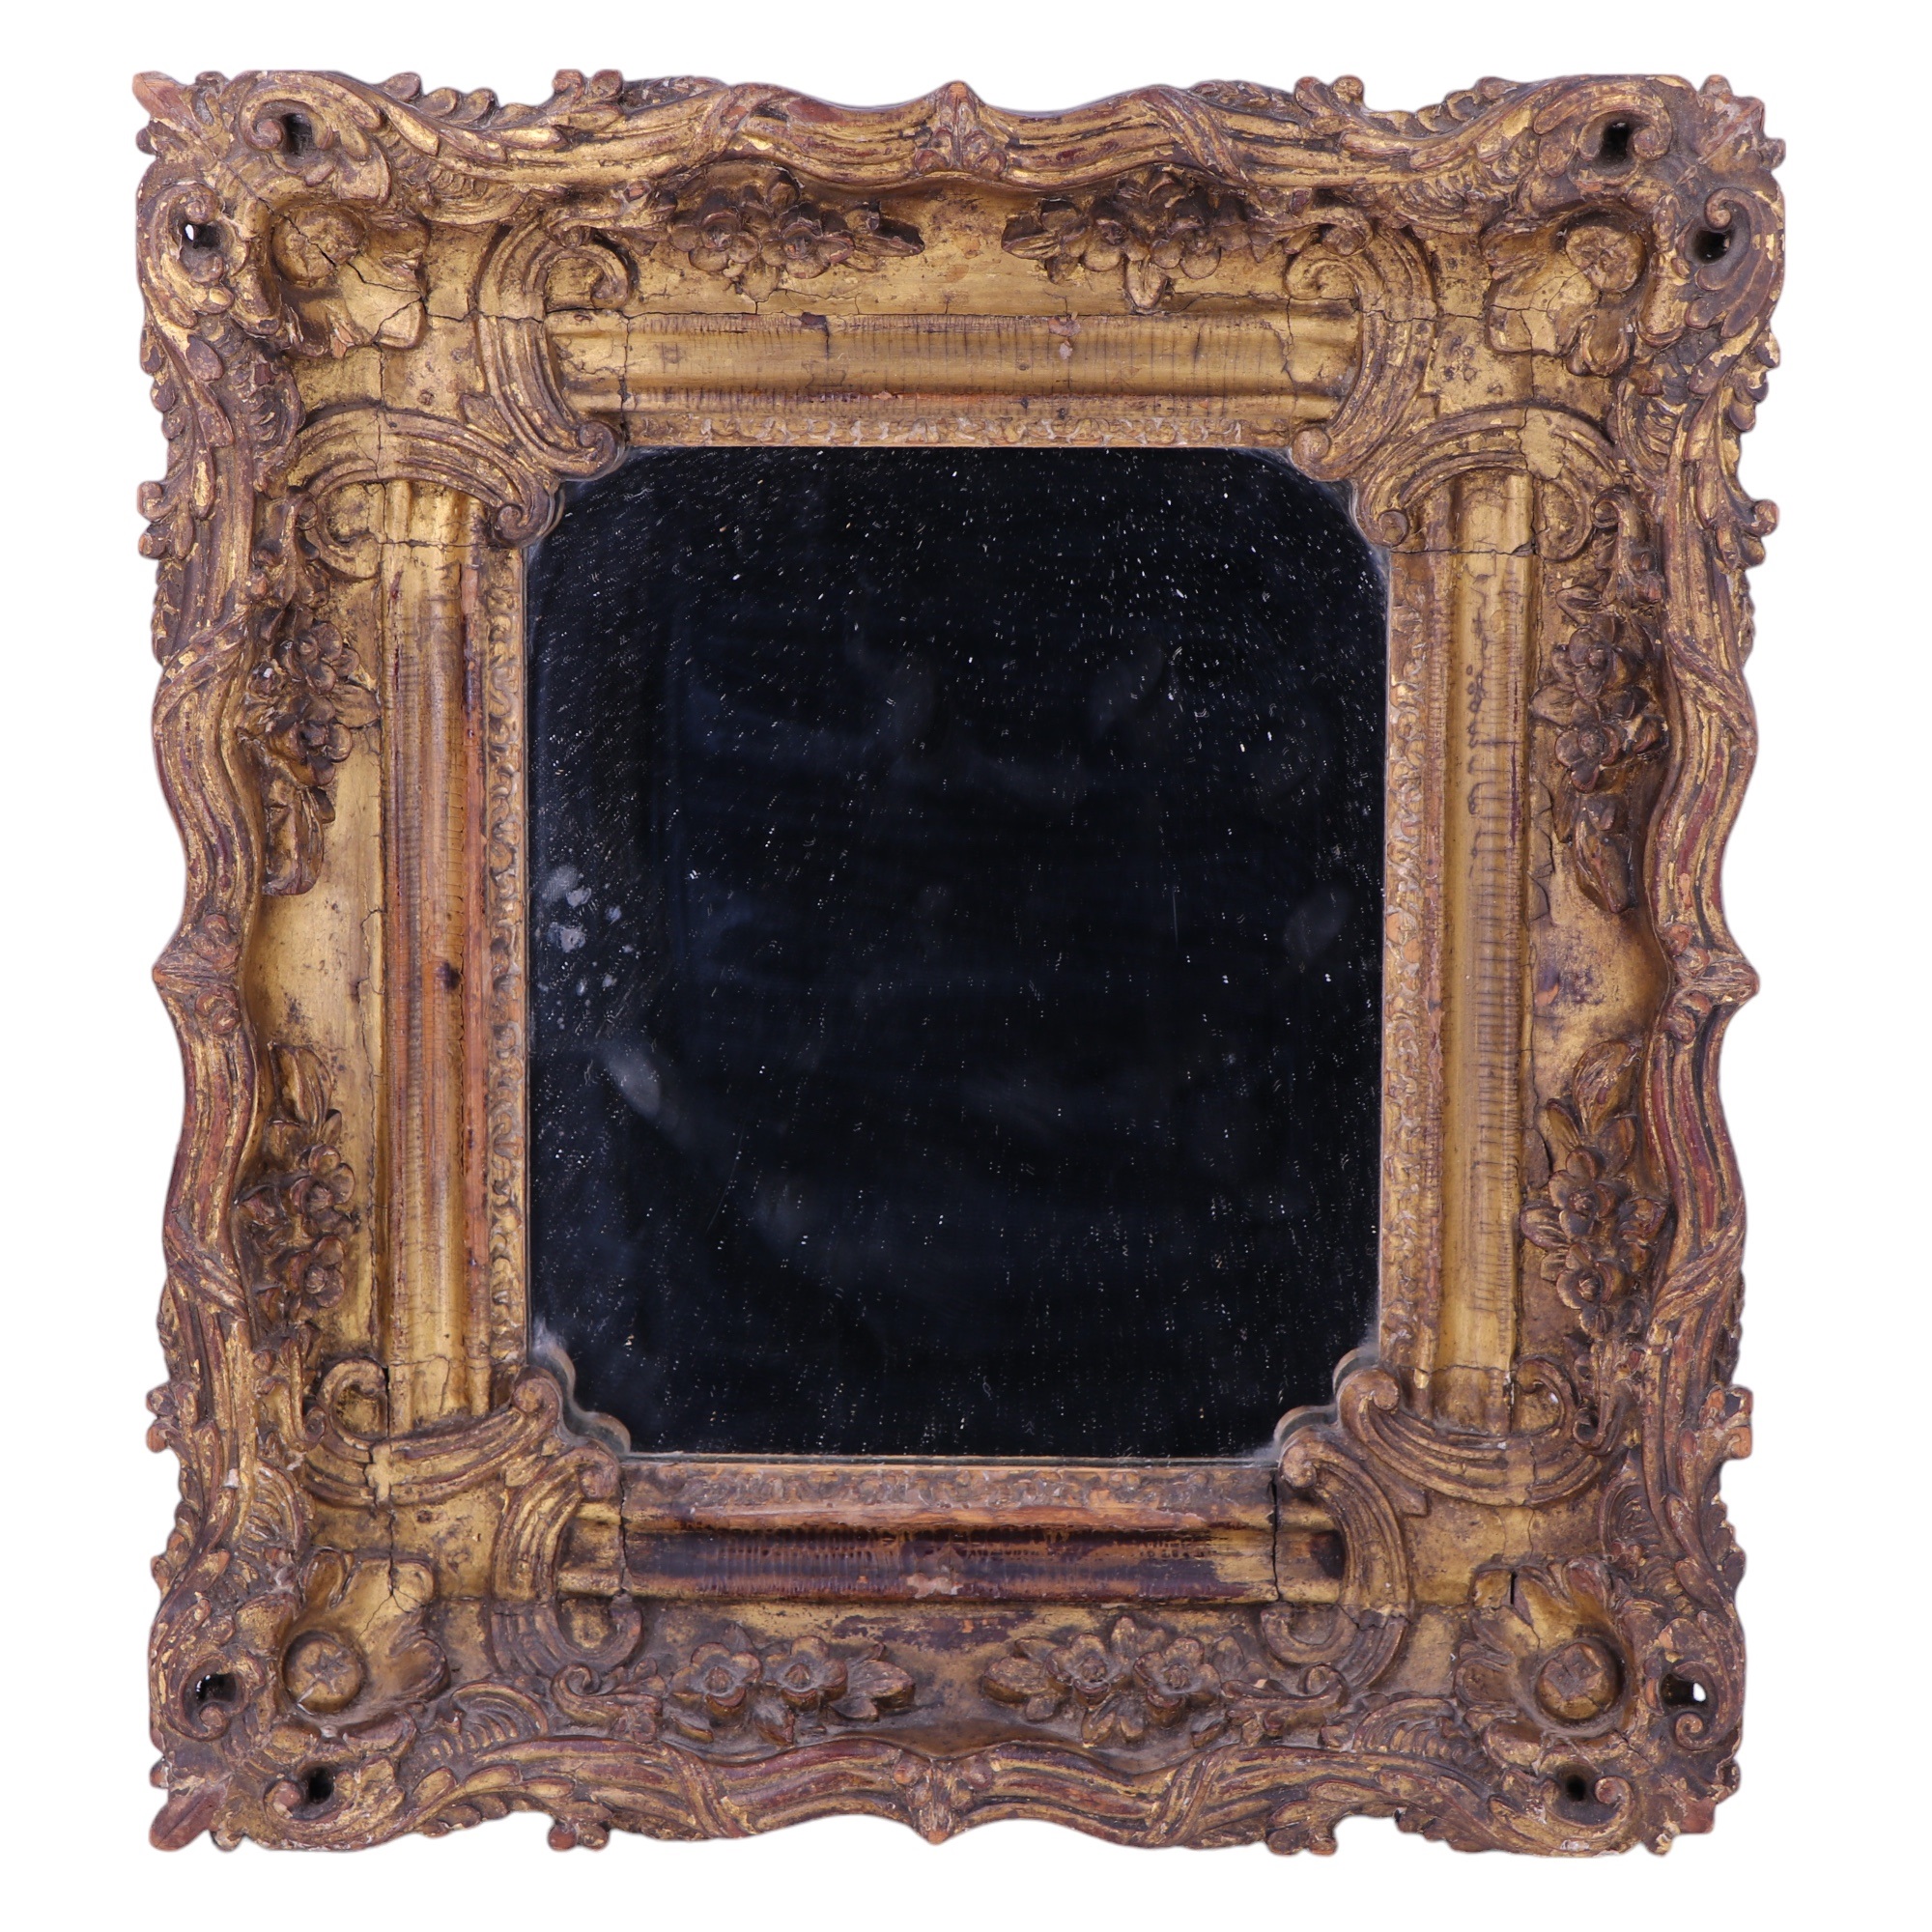 [ Holyrood Palace, Edinburgh, Scotland ] An early 19th Century giltwood picture frame, embellished